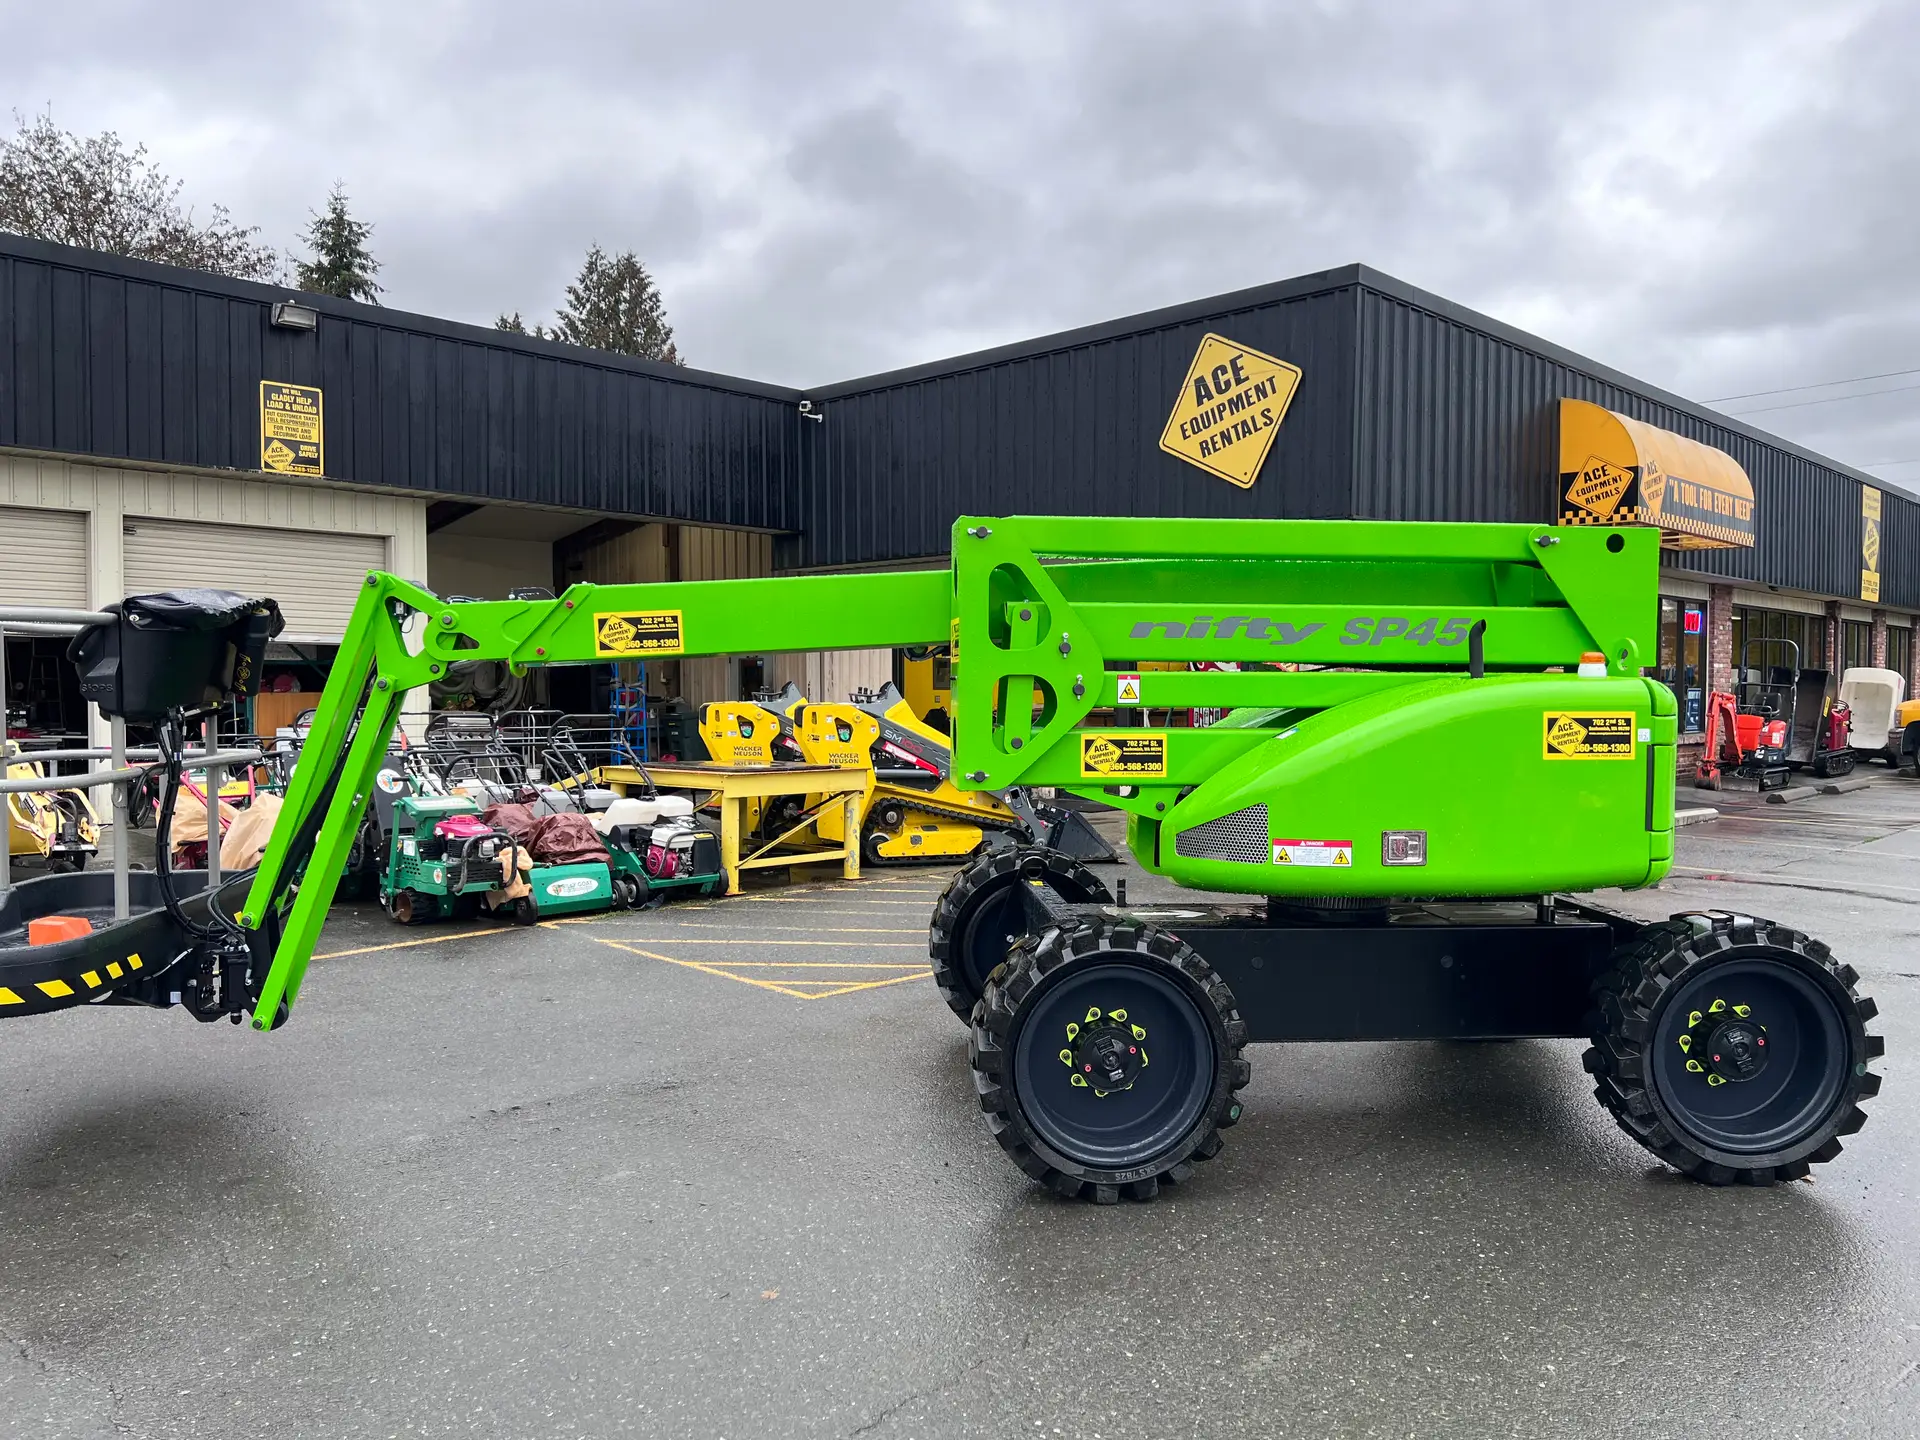 Nifty SP45D Boom Lift Rental from Ace Equipment Rentals in Snohomish, WA